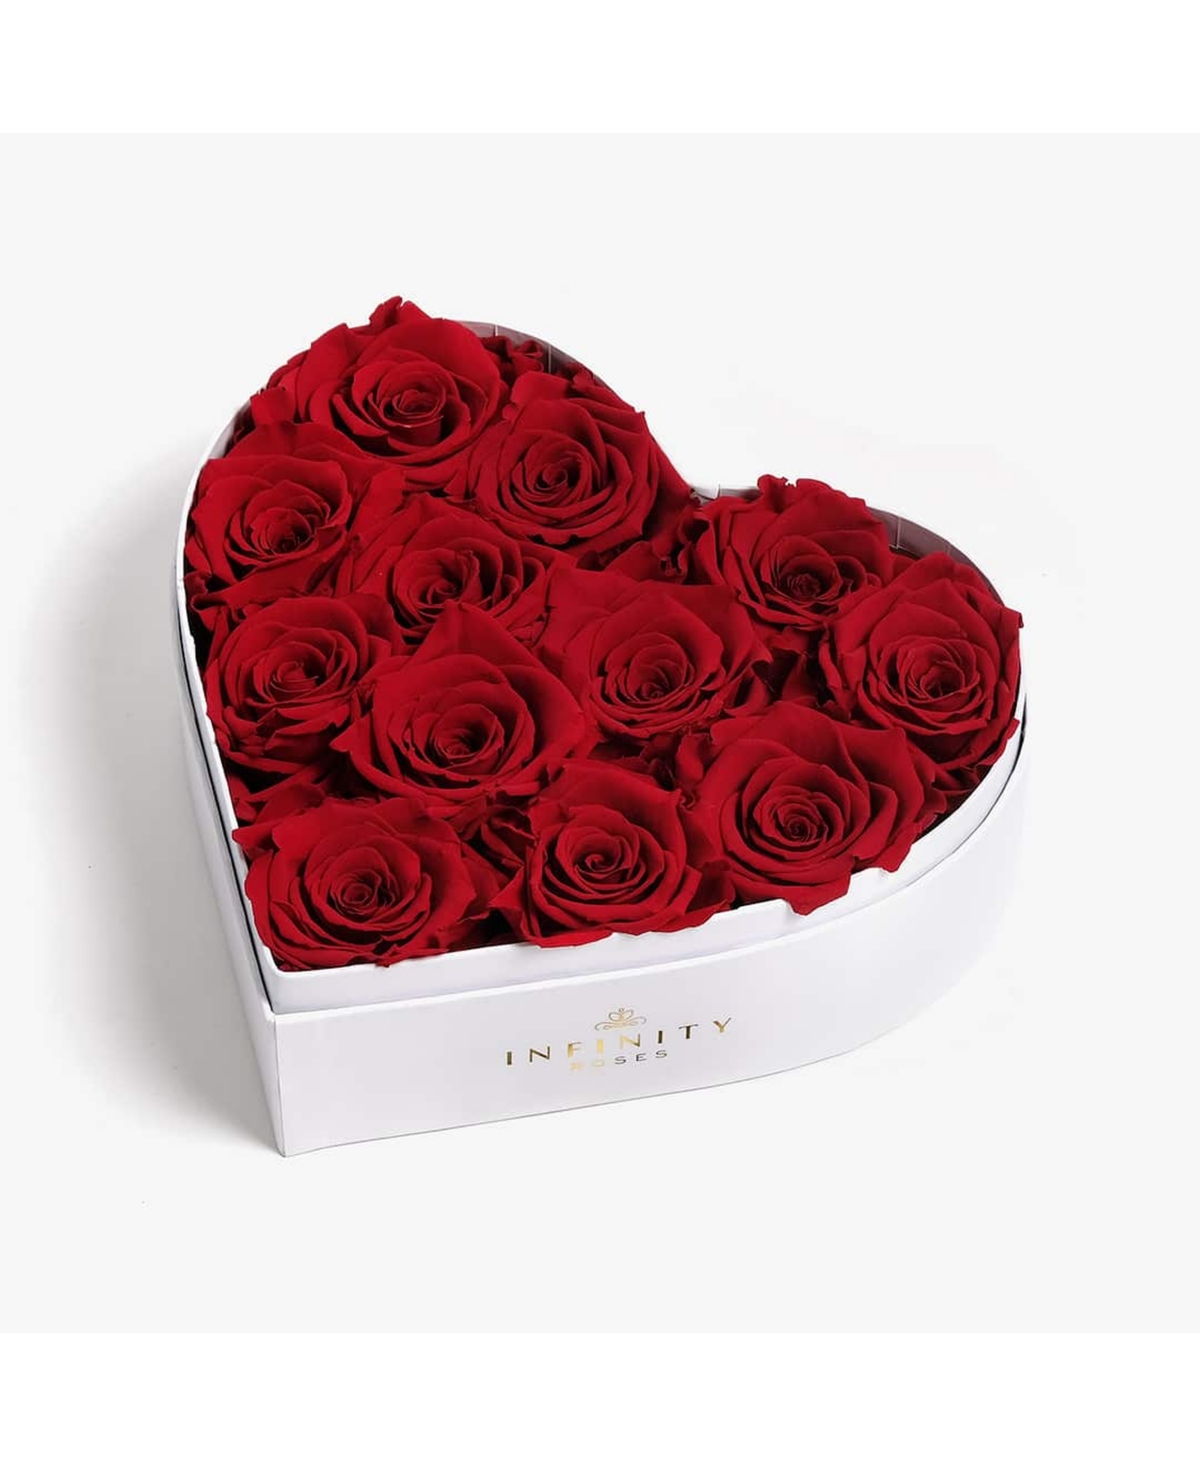 Heart Box of 12 Red Real Roses Preserved to Last Over a Year - Red